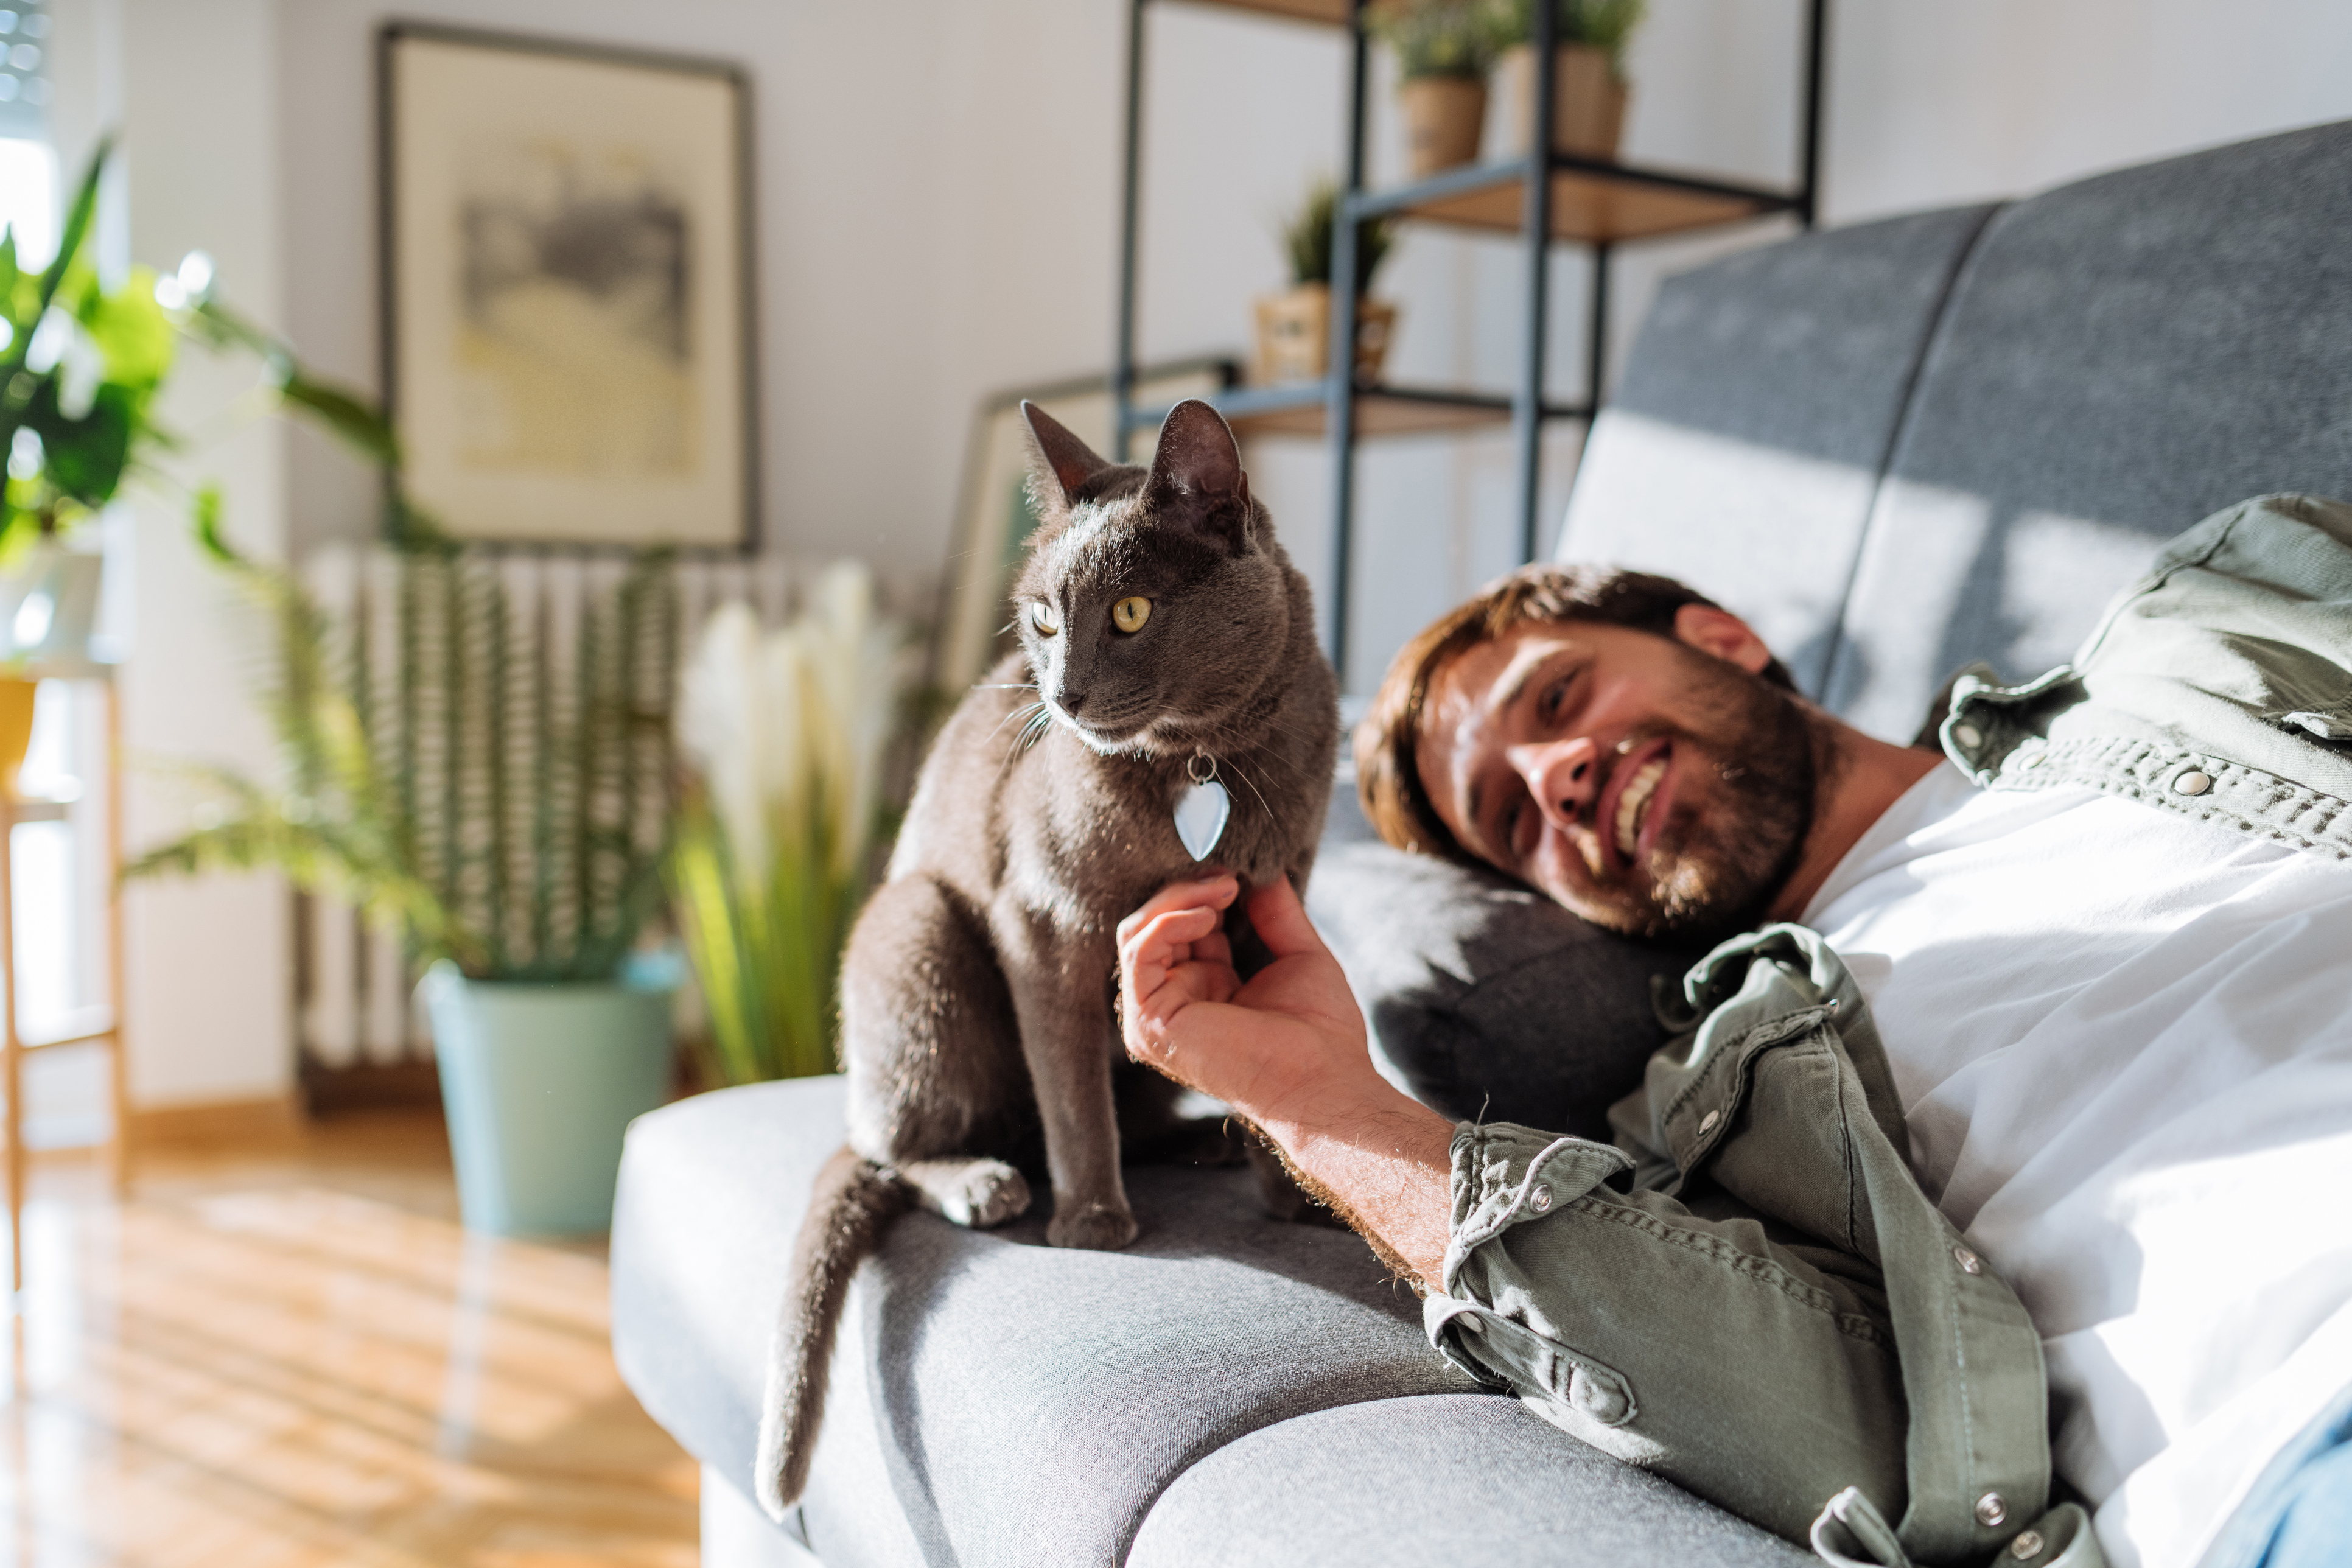 How Are Single Men That Own Cats Perceived By Women?